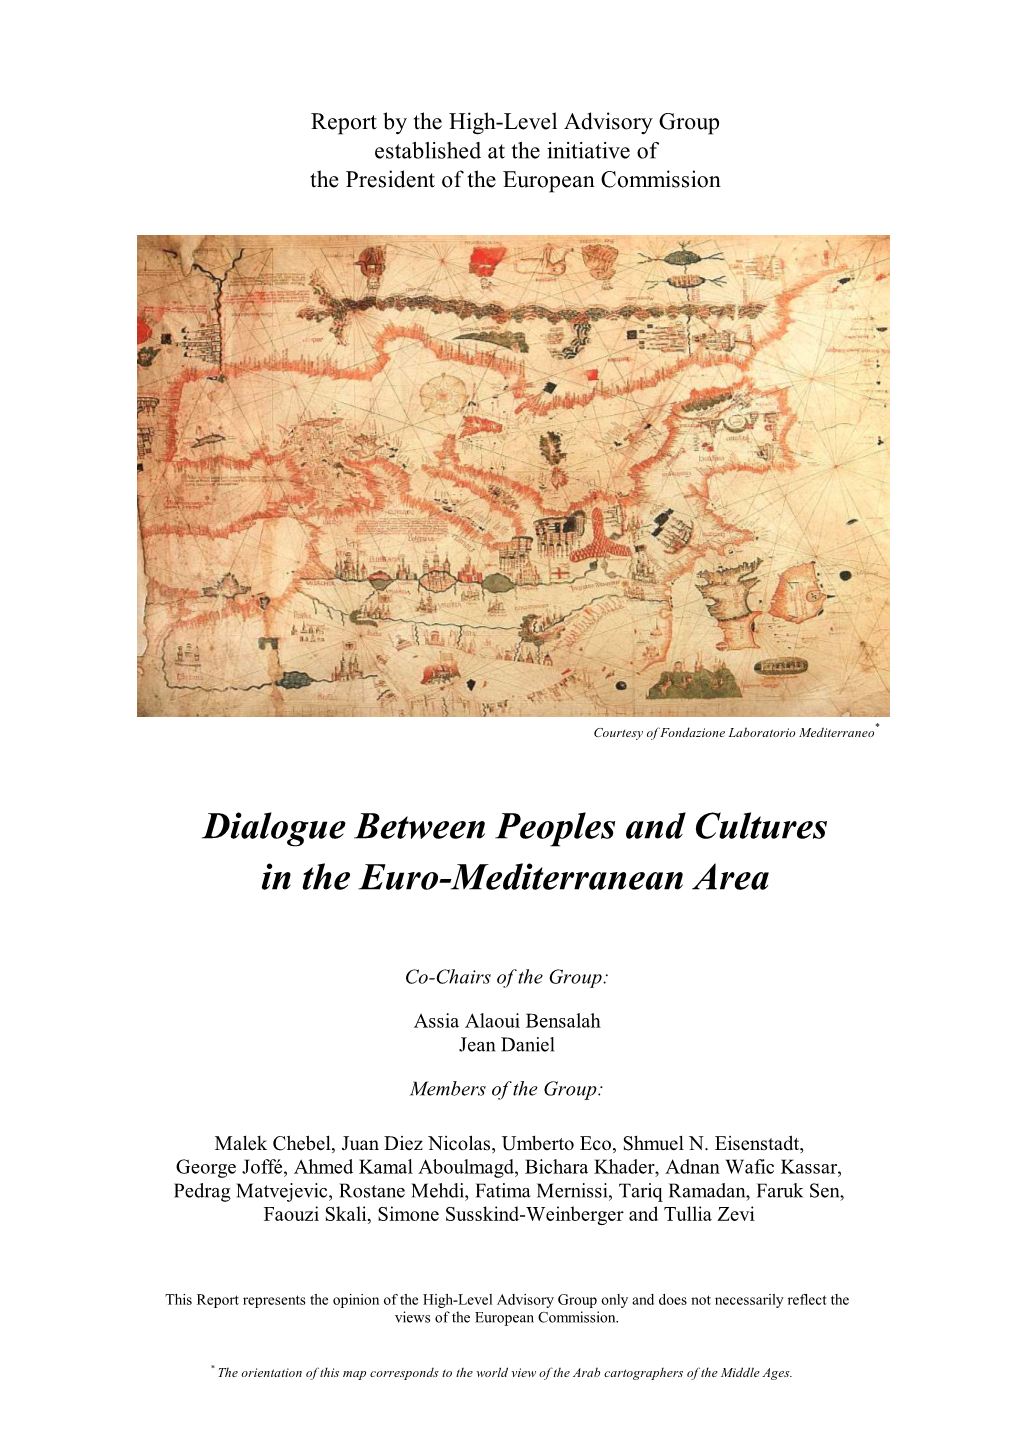 Dialogue Between Peoples and Cultures in the Euro-Mediterranean Area